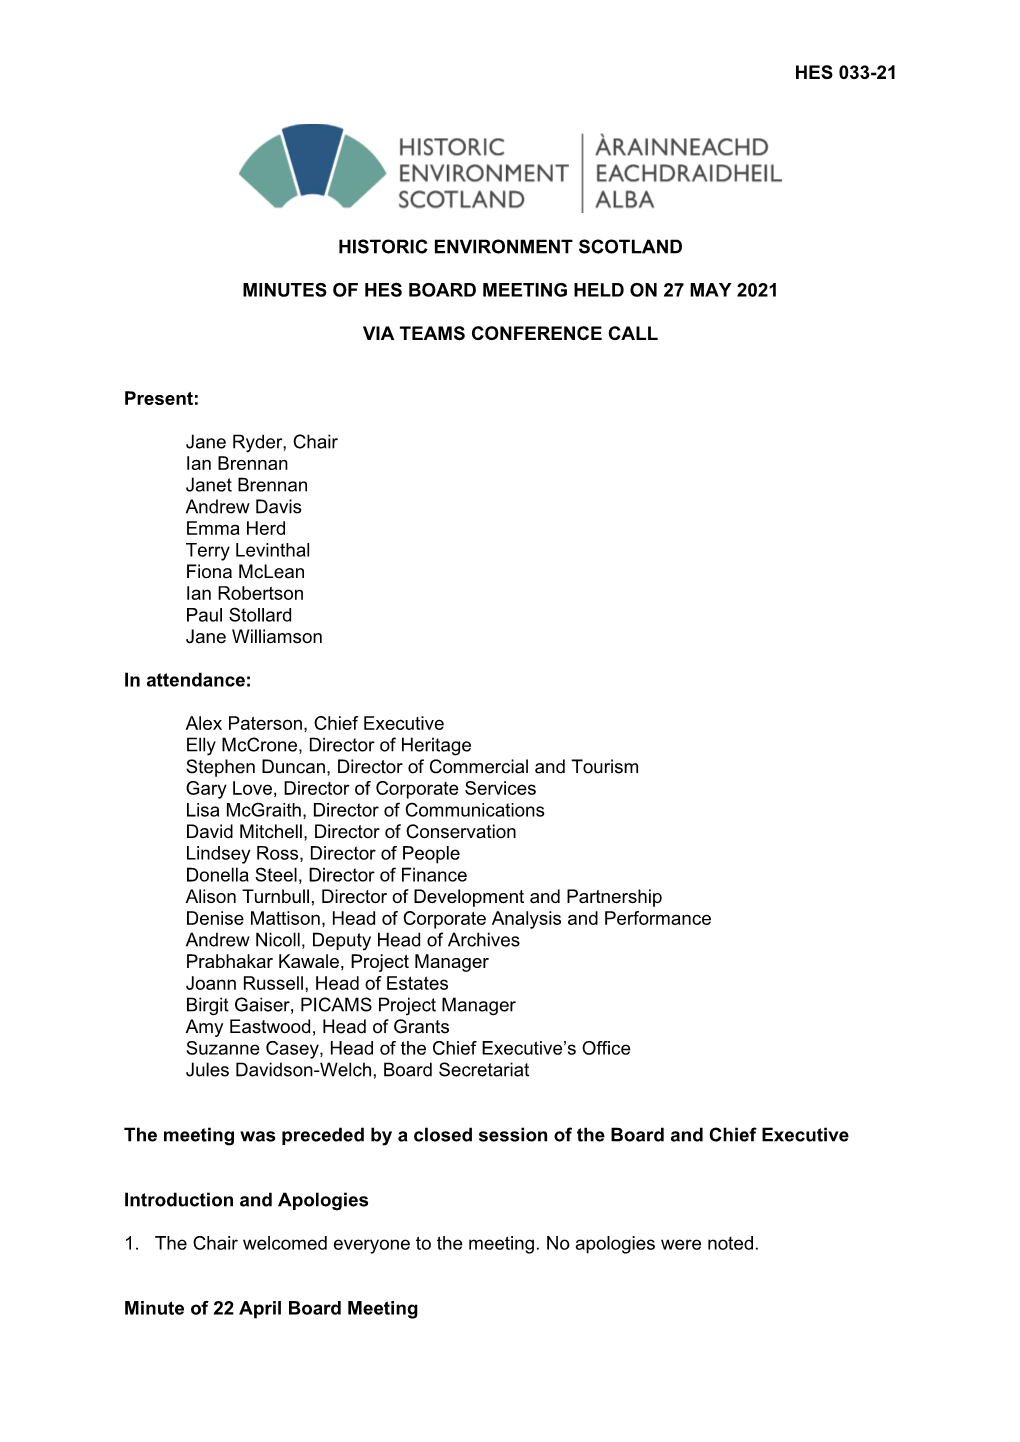 Minutes of Hes Board Meeting Held on 27 May 2021